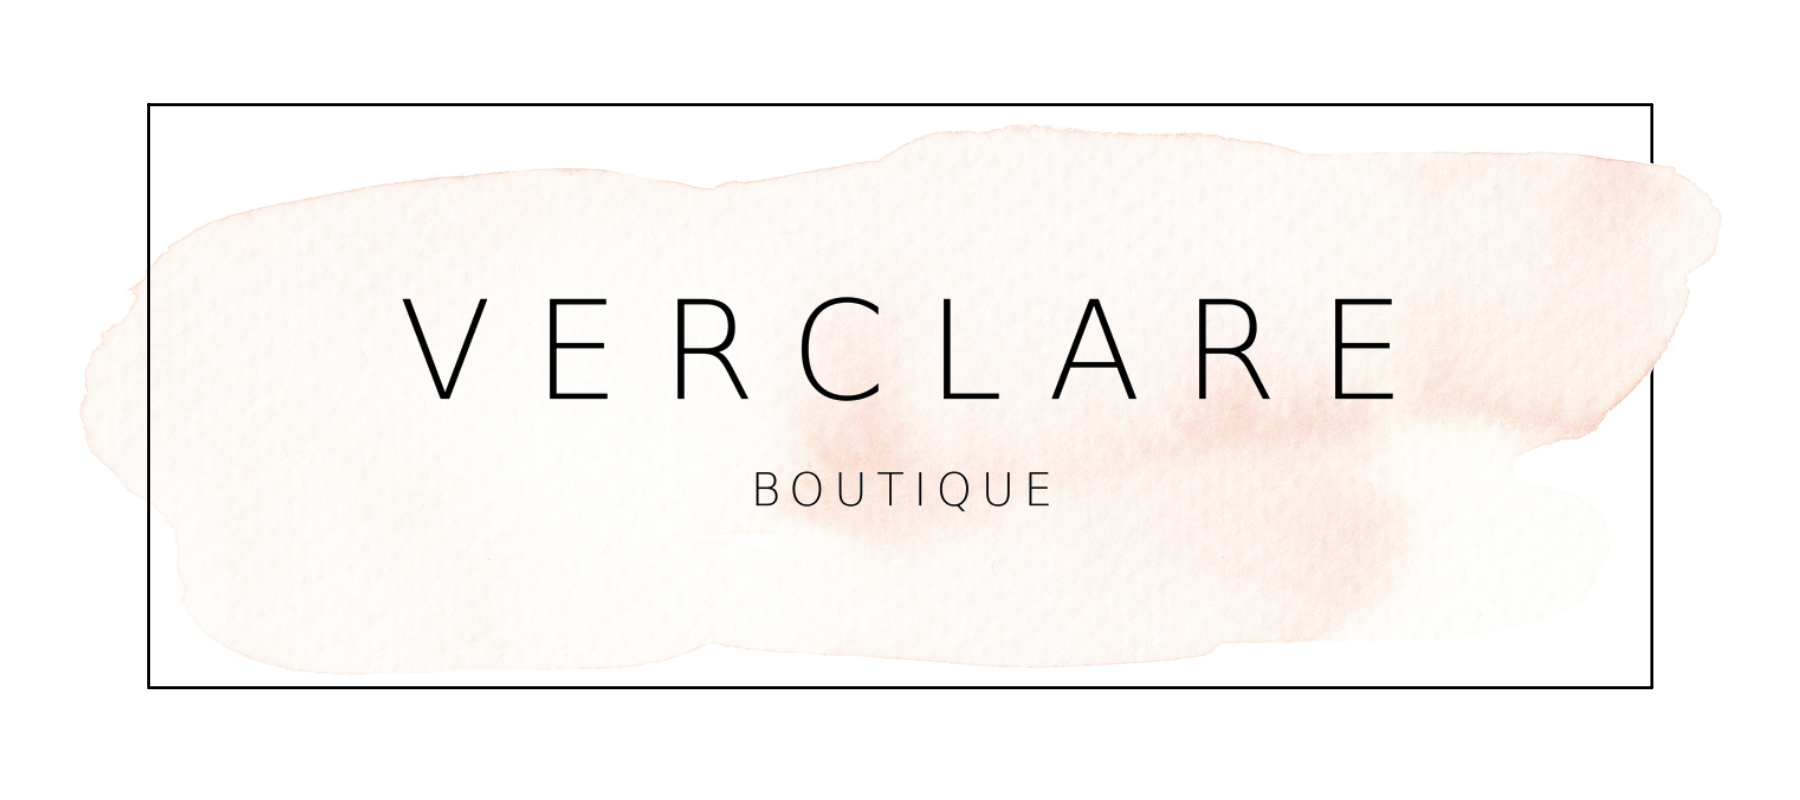 Shop VerClare Boutique, a women's online and in store fashion boutique located on 231 South Green Street, Chenoa, Illinois 61726 - stop in and see us!